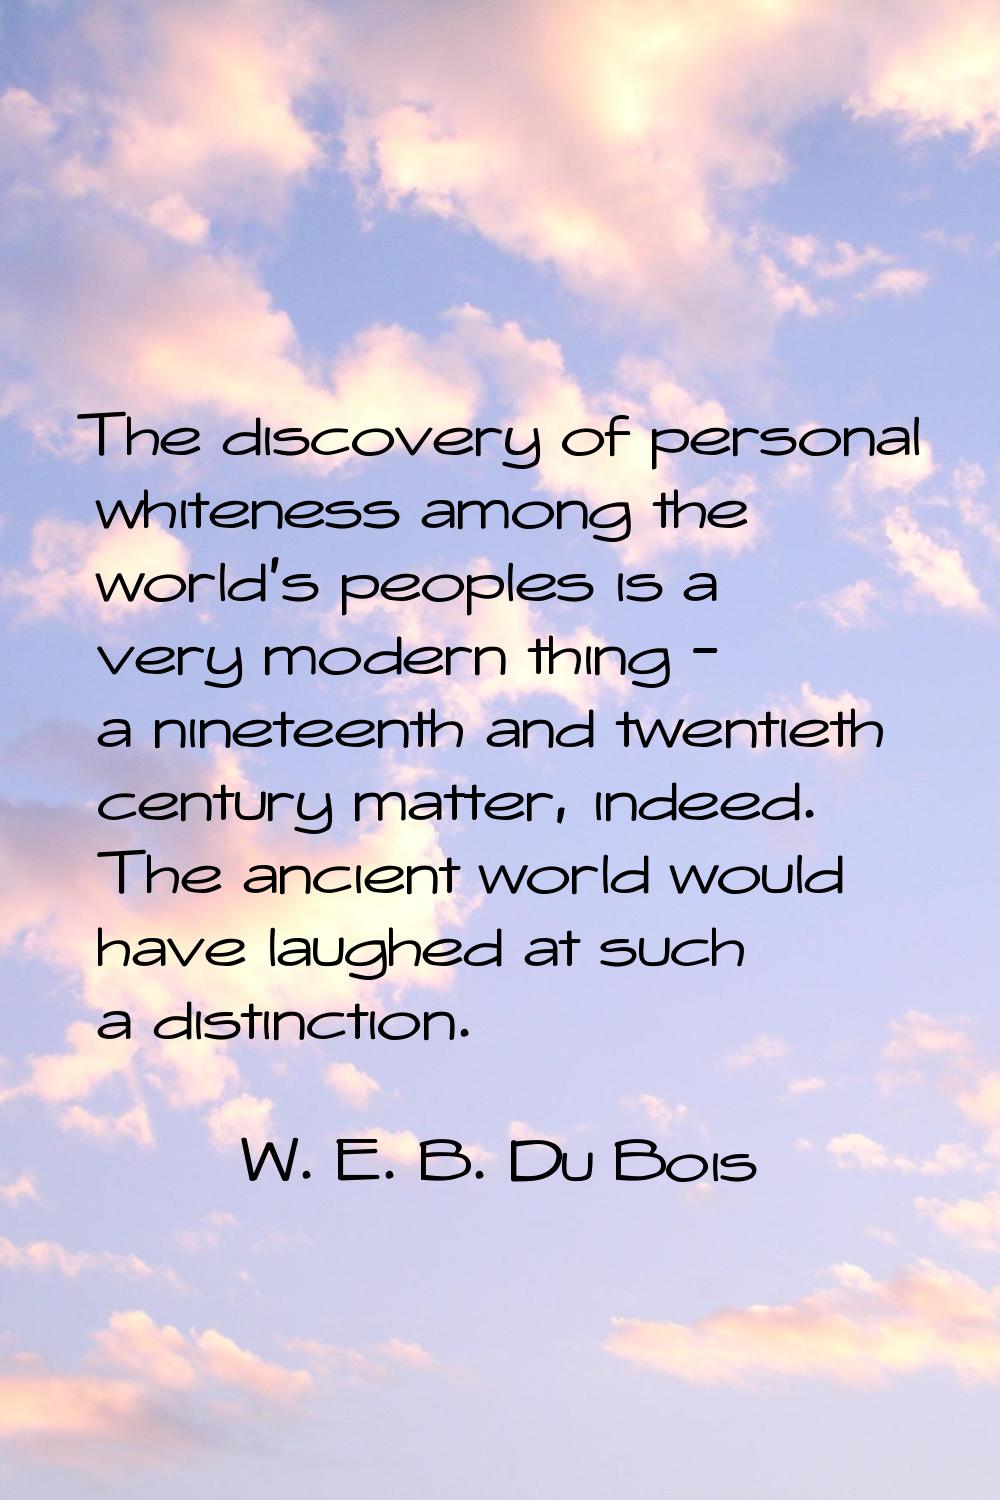 The discovery of personal whiteness among the world's peoples is a very modern thing - a nineteenth